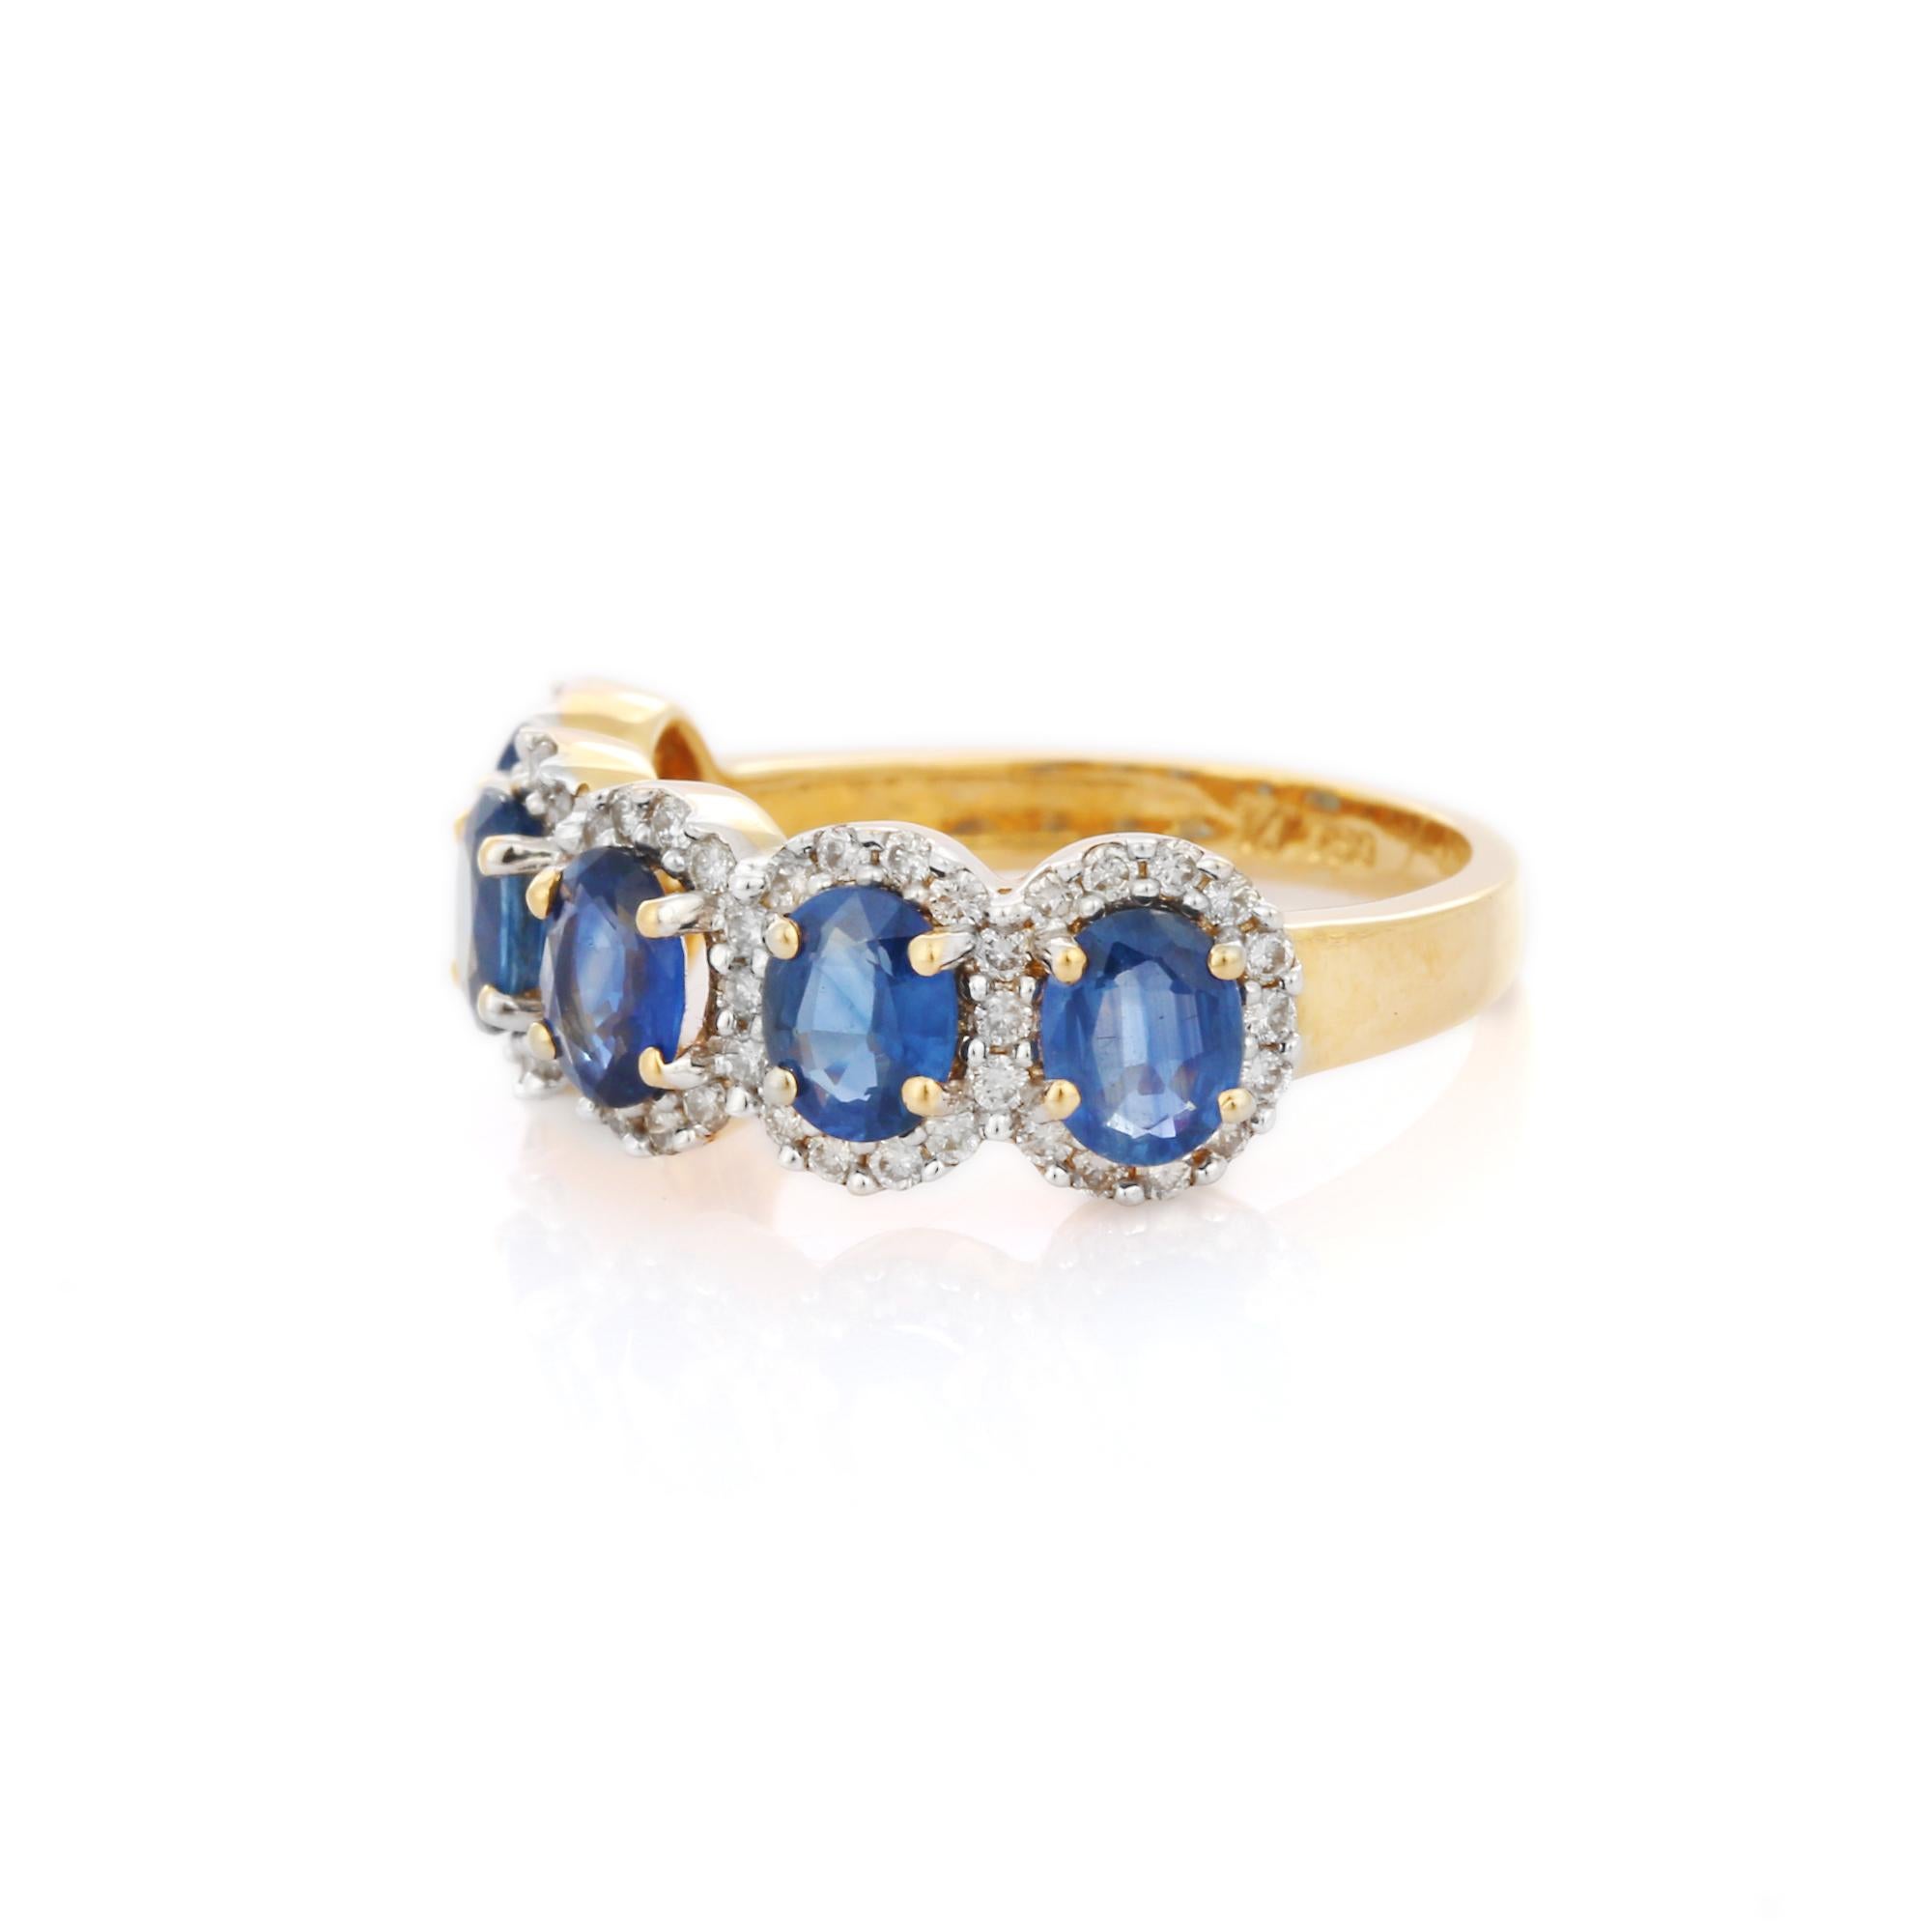 For Sale:  18K Yellow Gold Half Engagement Band with Sapphires Amidst in Diamonds 3